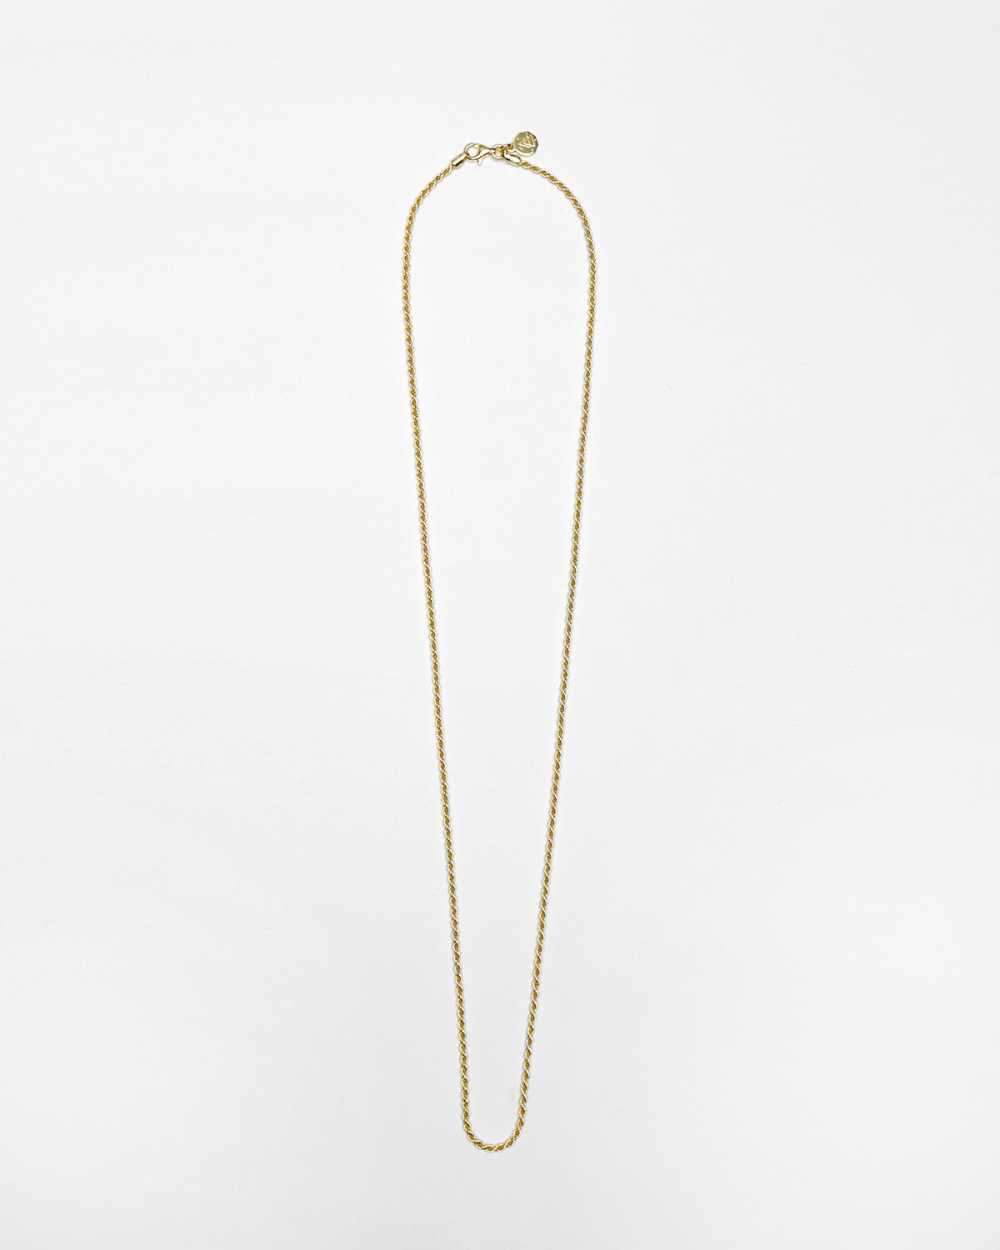 TORCHON CHAIN 040 / POLISHED YELLOW GOLD